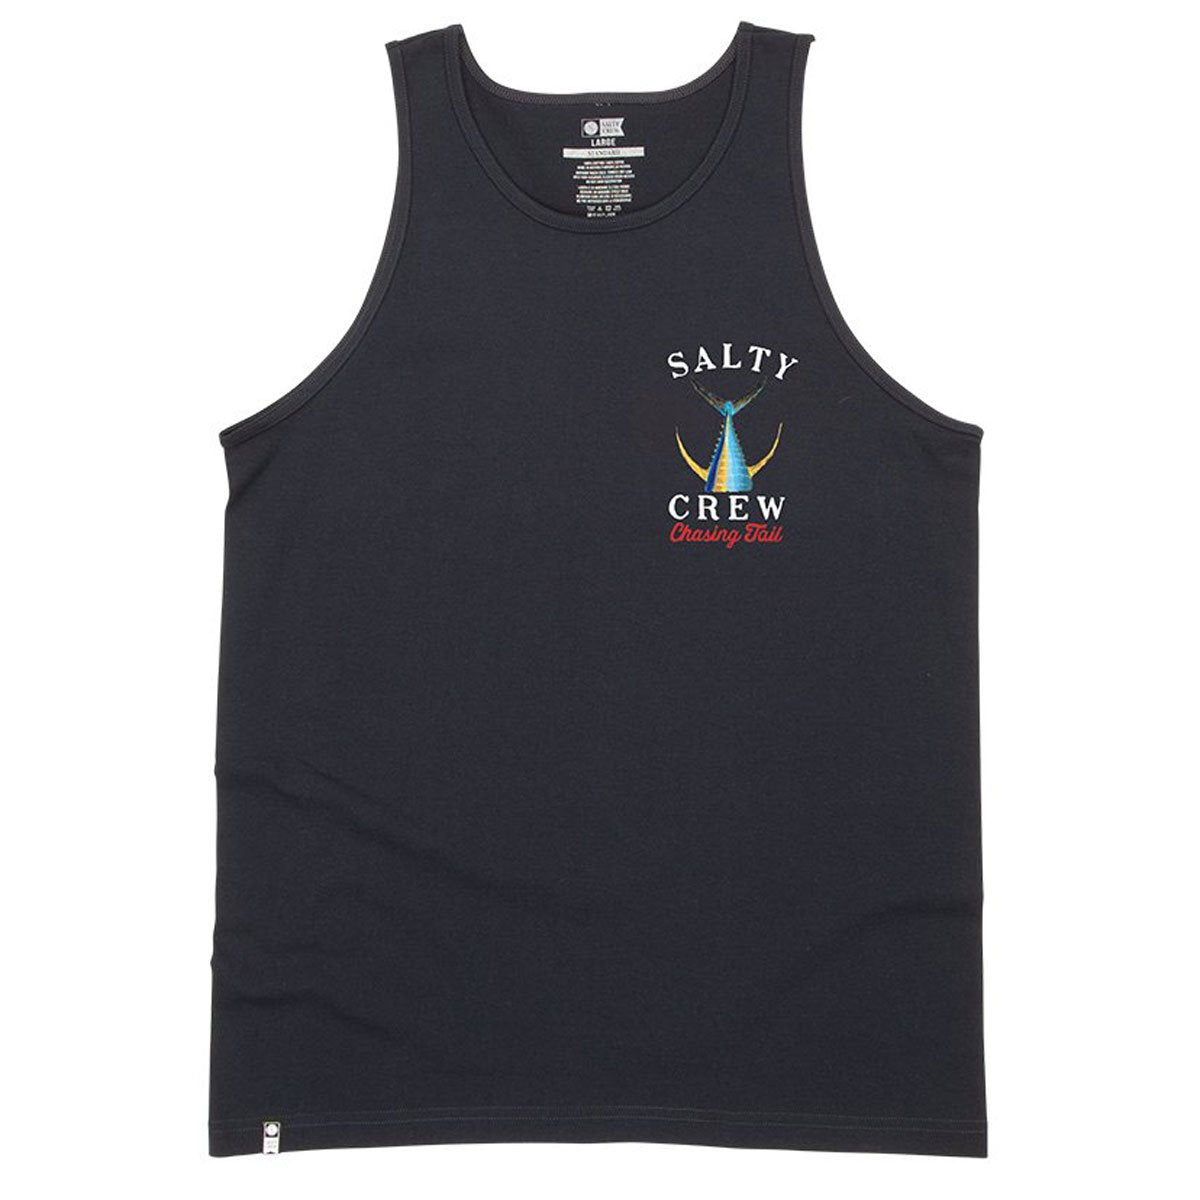 Salty Crew Tailed Tank Top - Navy image 1